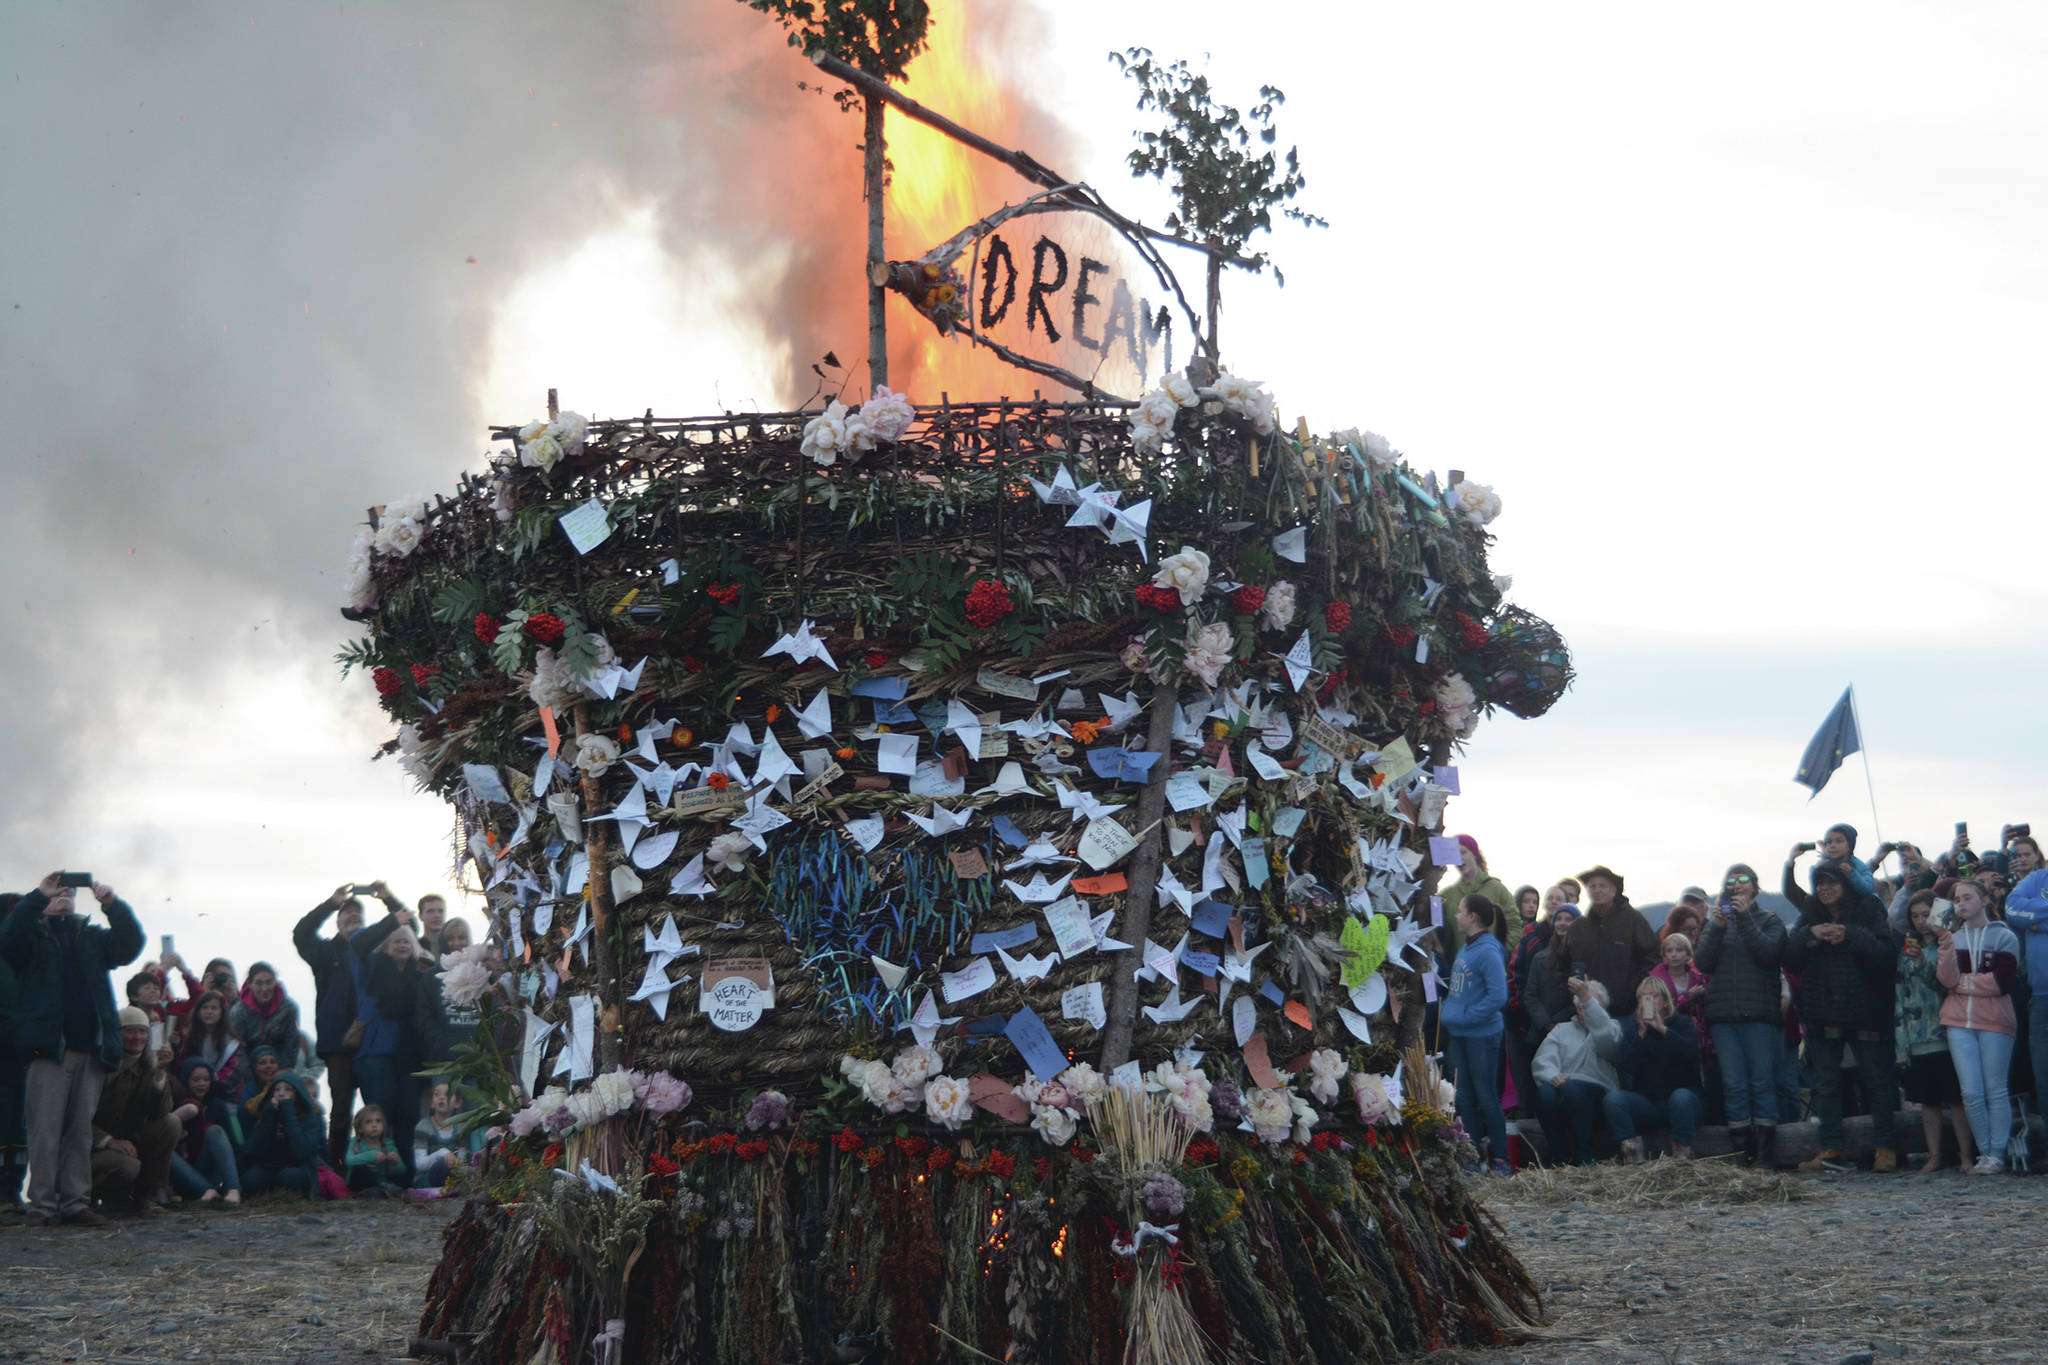 The 2018 Burning Basket, Dream, catches fire on Sept. 9, 2018, at Mariner Park in Homer, Alaska. (Photo by Michael Armstrong/Homer News)